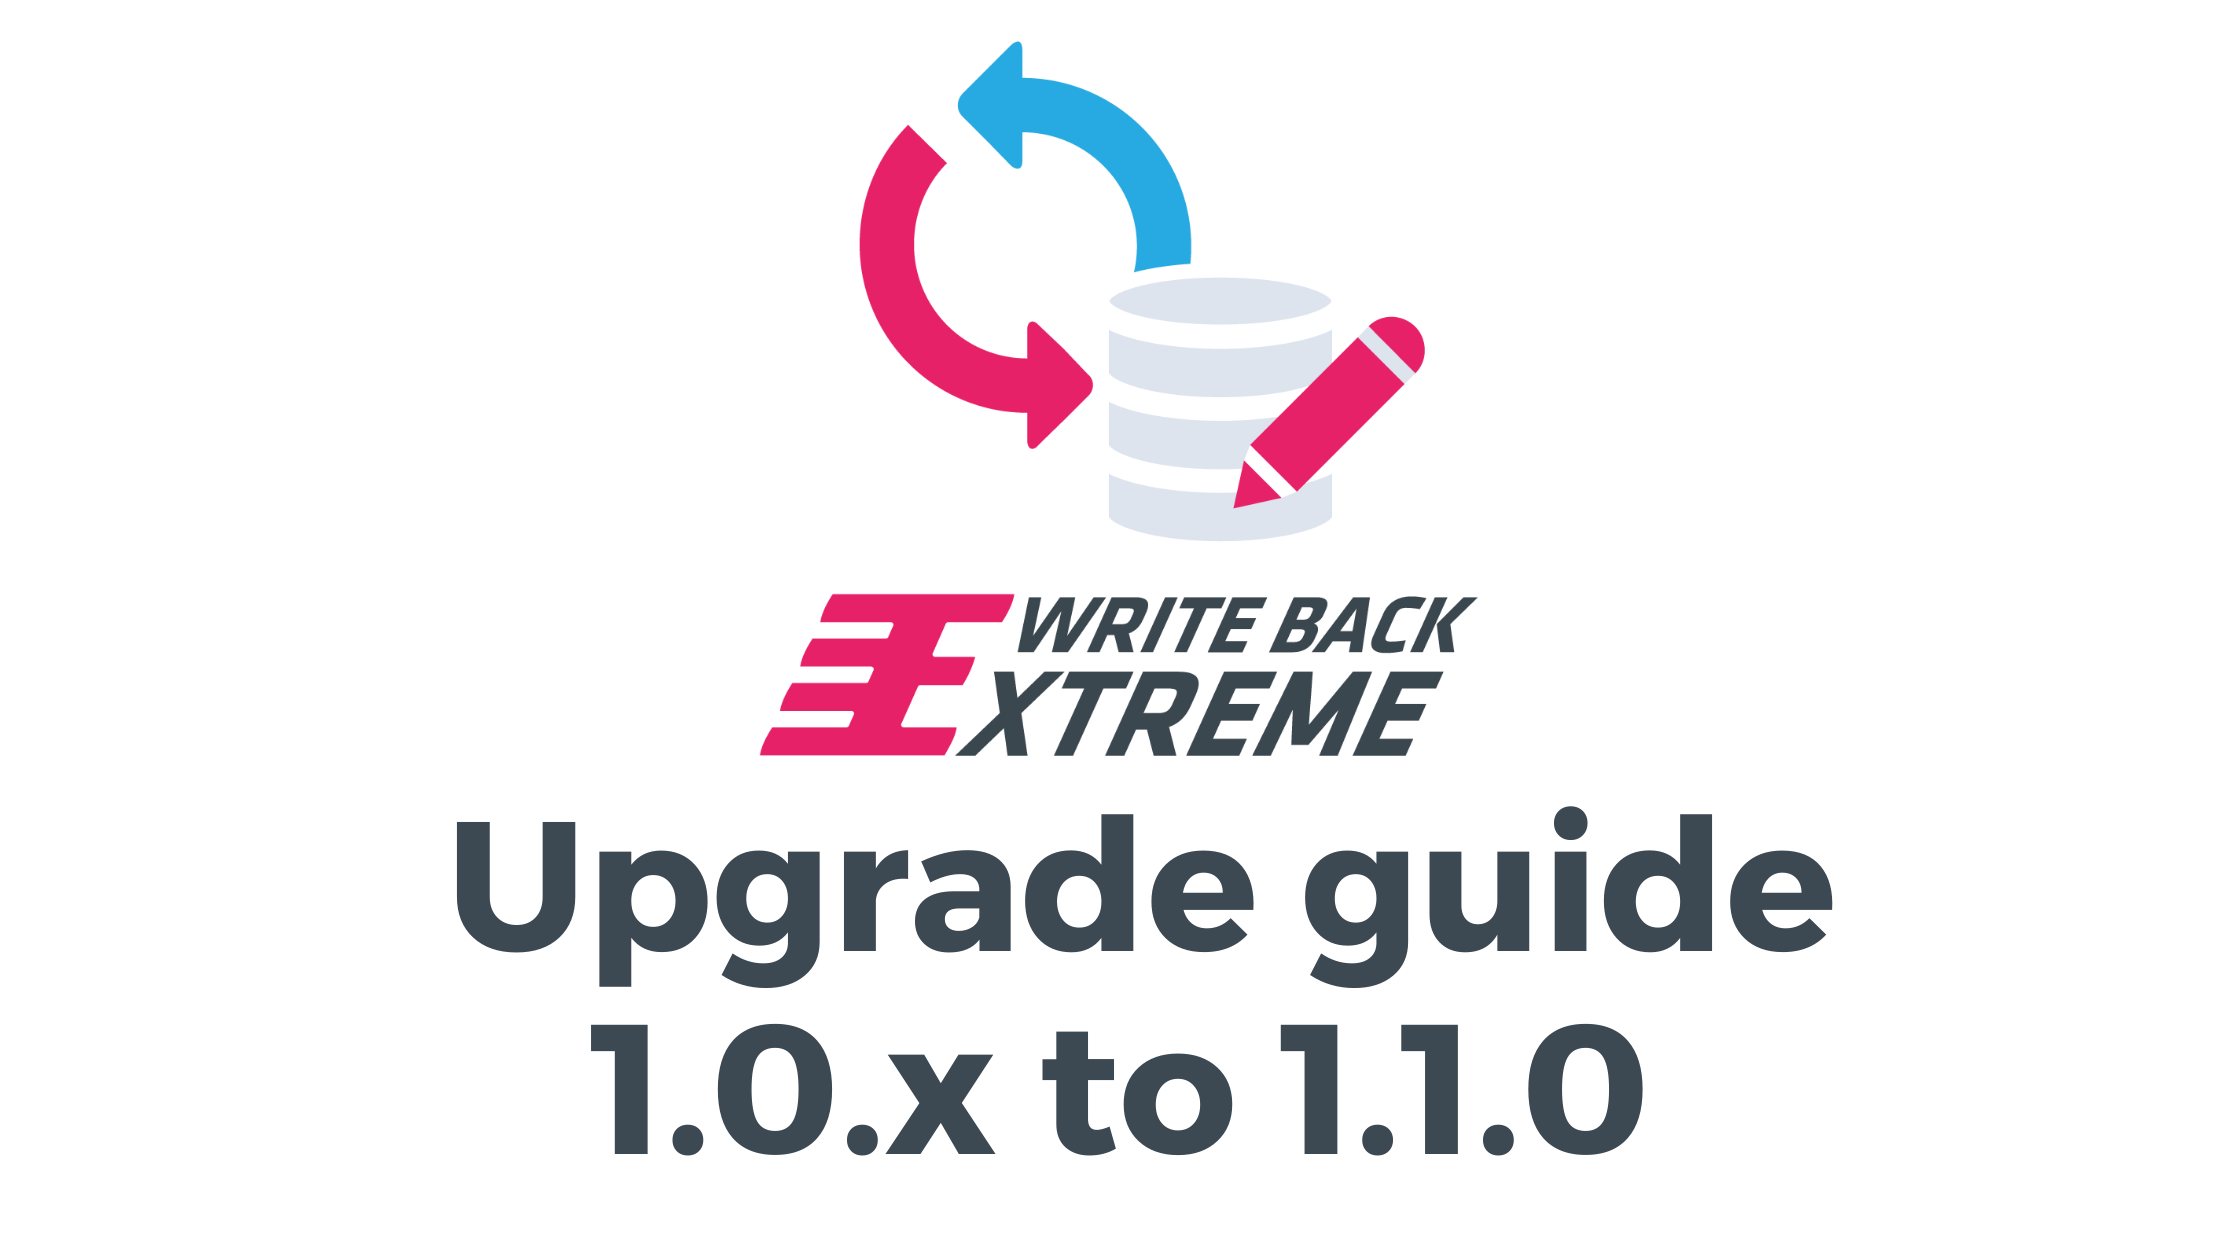 Write Back Extreme upgrade guide